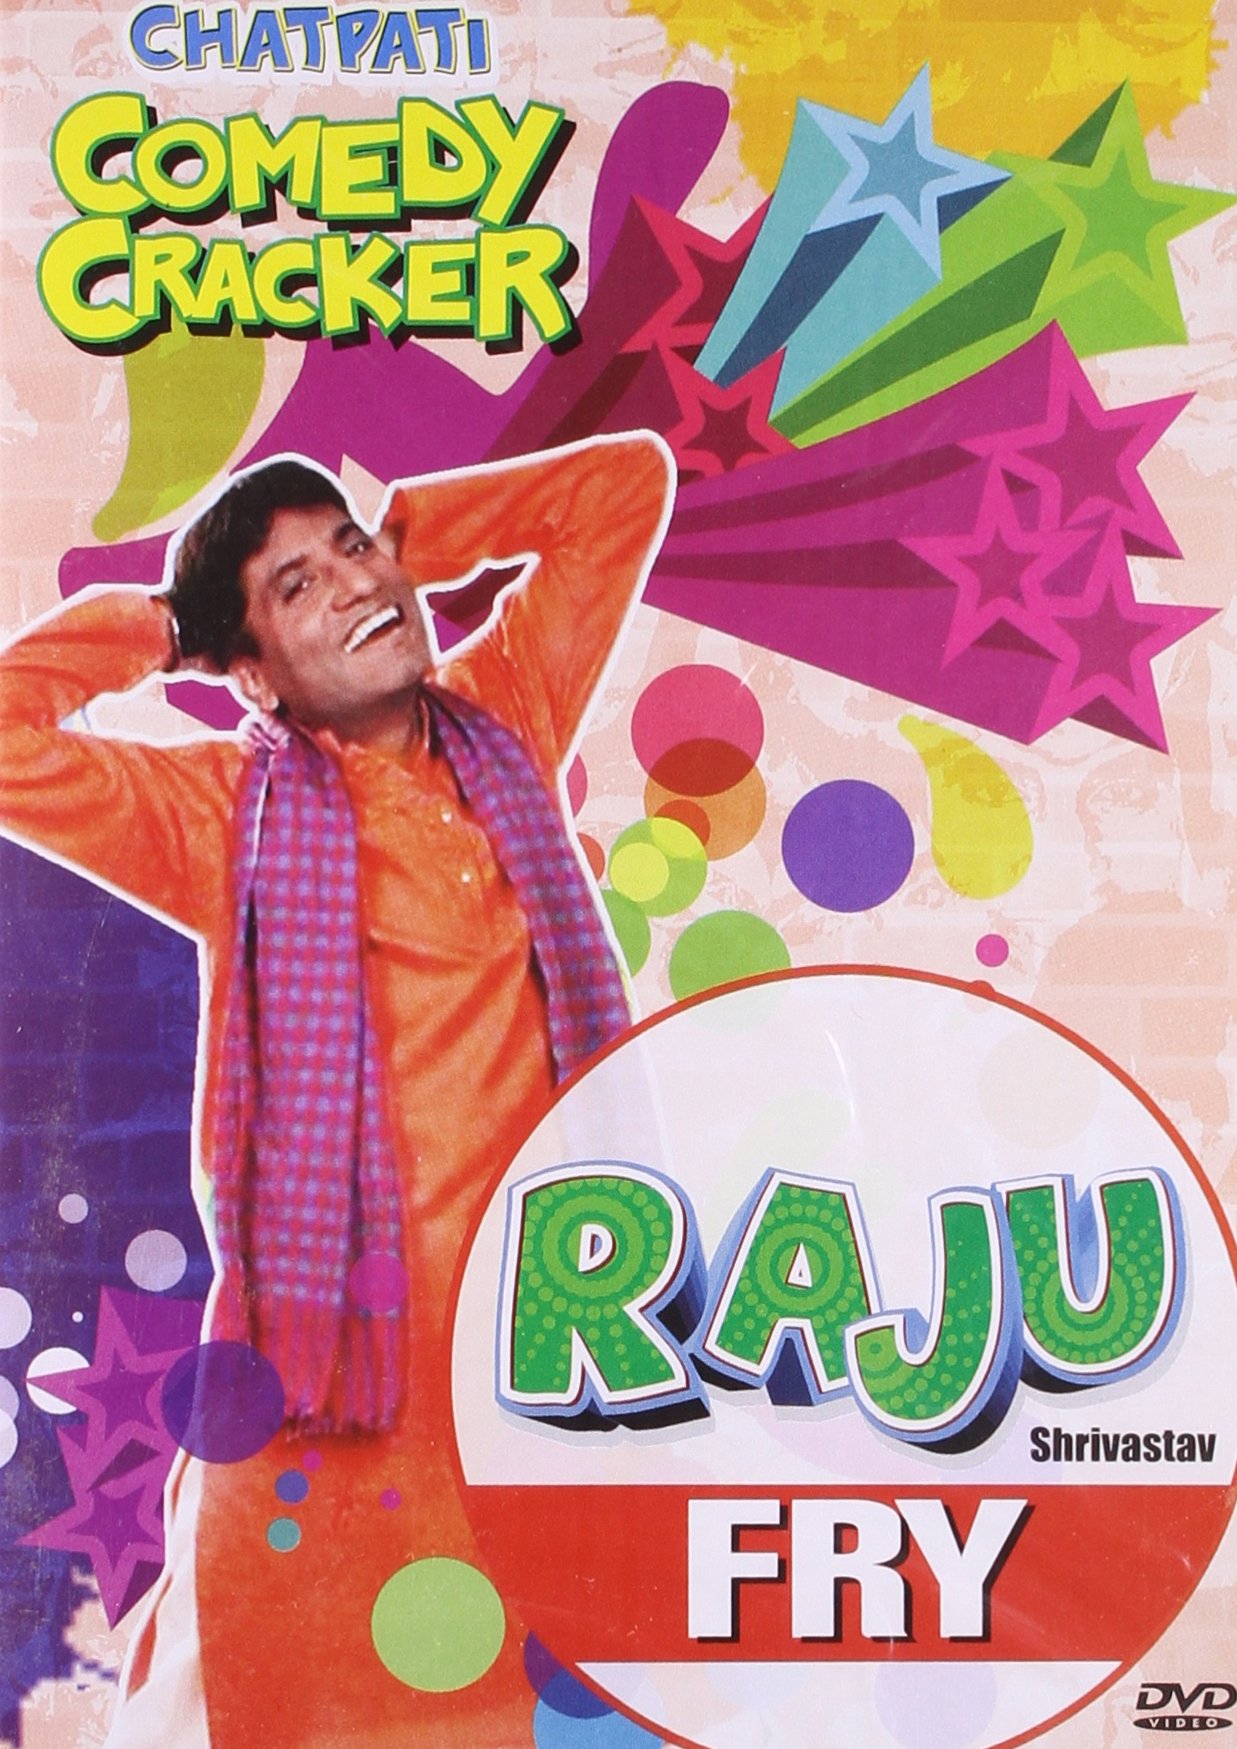 chatpati-comedy-cracker-raju-fry-movie-purchase-or-watch-online